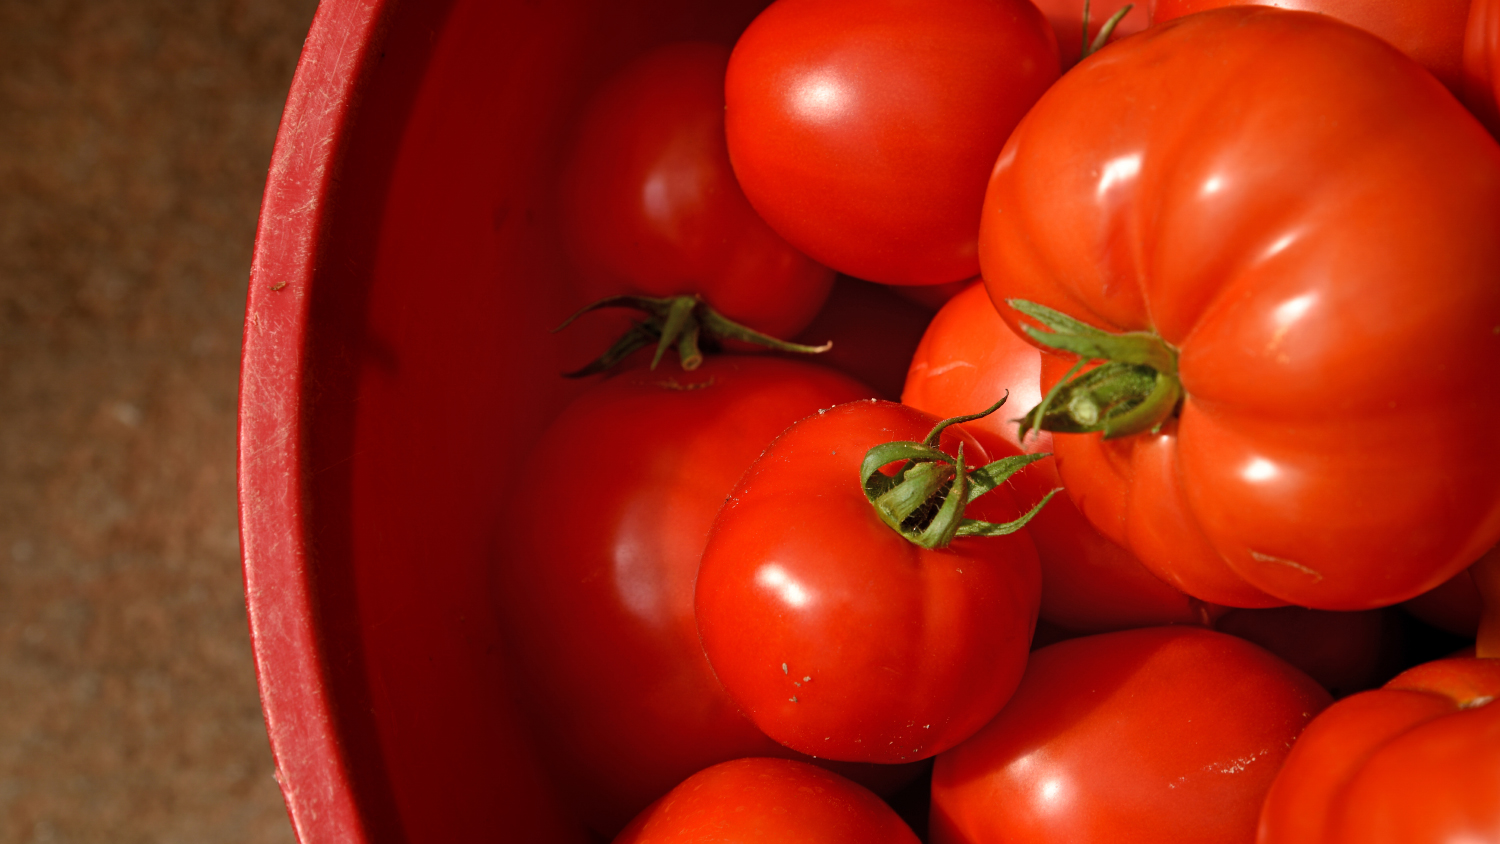 A textural photo of bright red tomatoes.